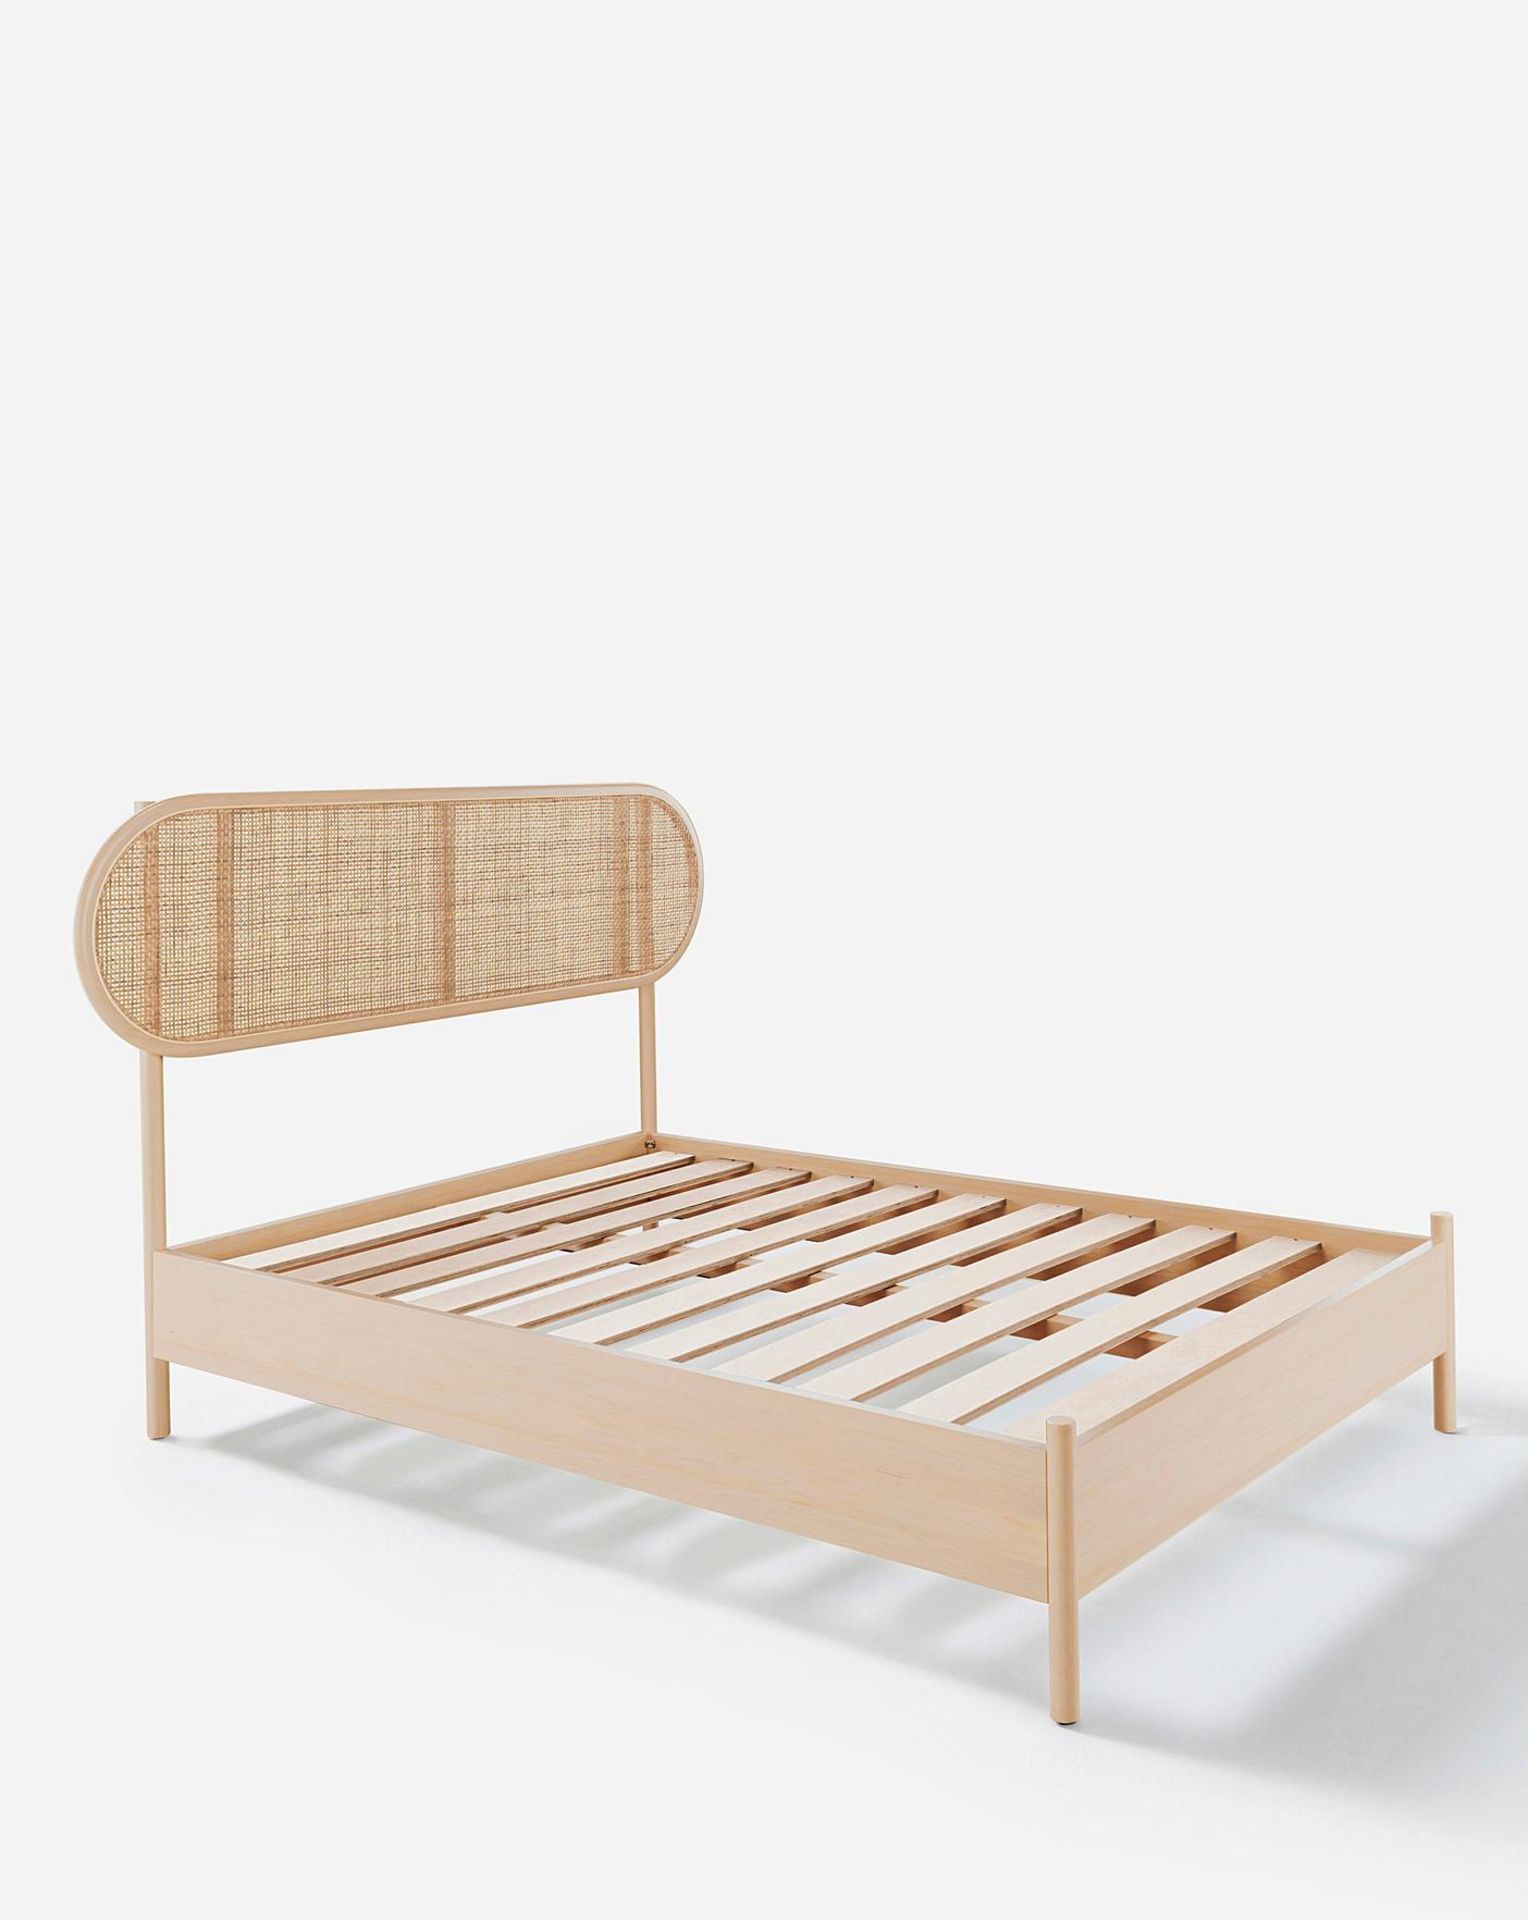 BRAND NEW AULIARATTAN BED FRAME KING SIZE S1R10, NATURAL LUXUEY DESIGN FOR ANY STYLE. - Image 2 of 2